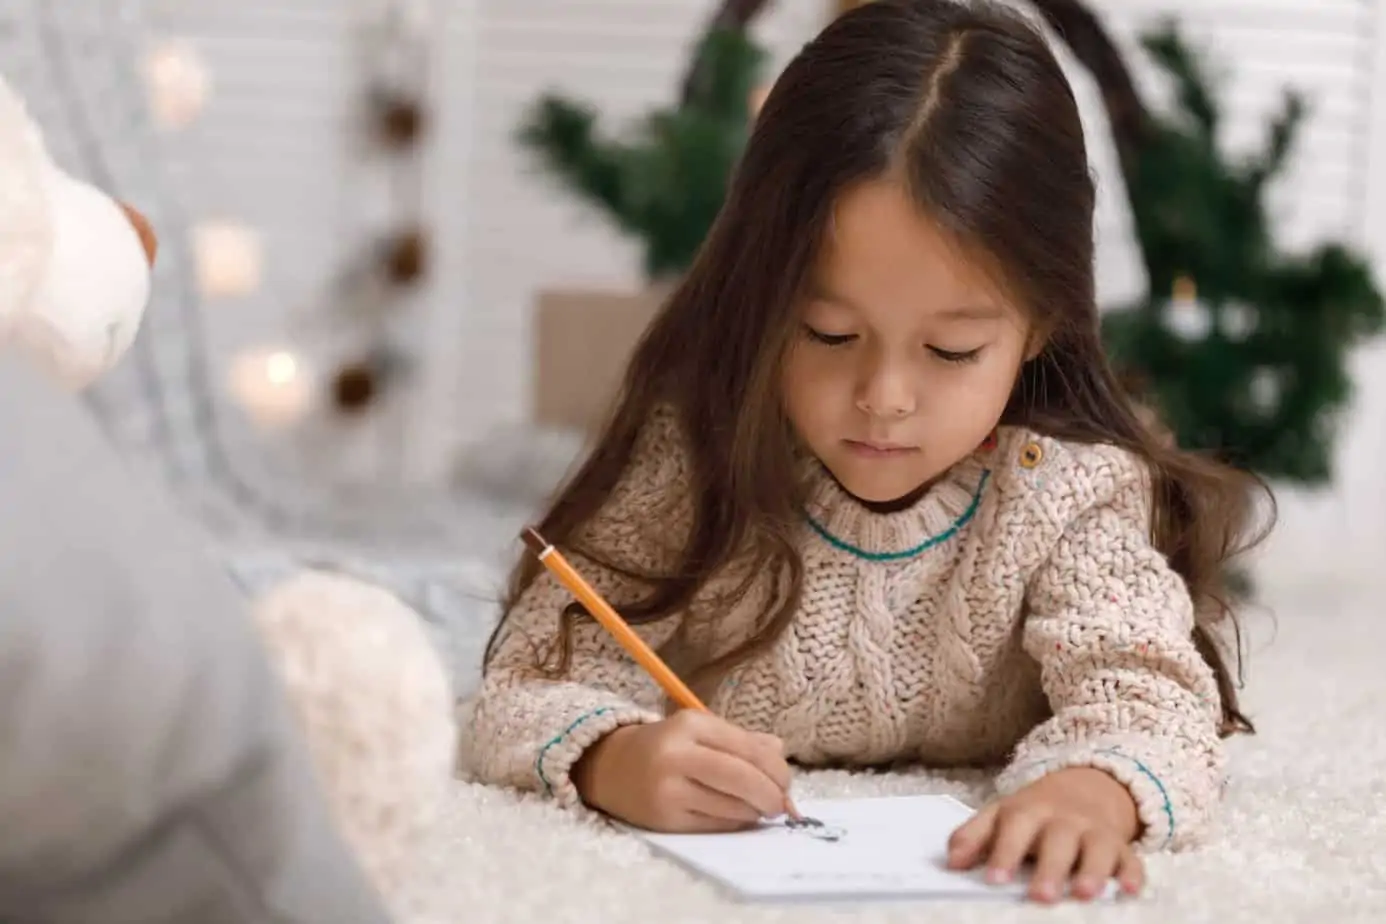 Santa Claus' real mailing address and how to send a letter to Santa, receive a letter from Santa and have your letter postmarked from the North Pole. 